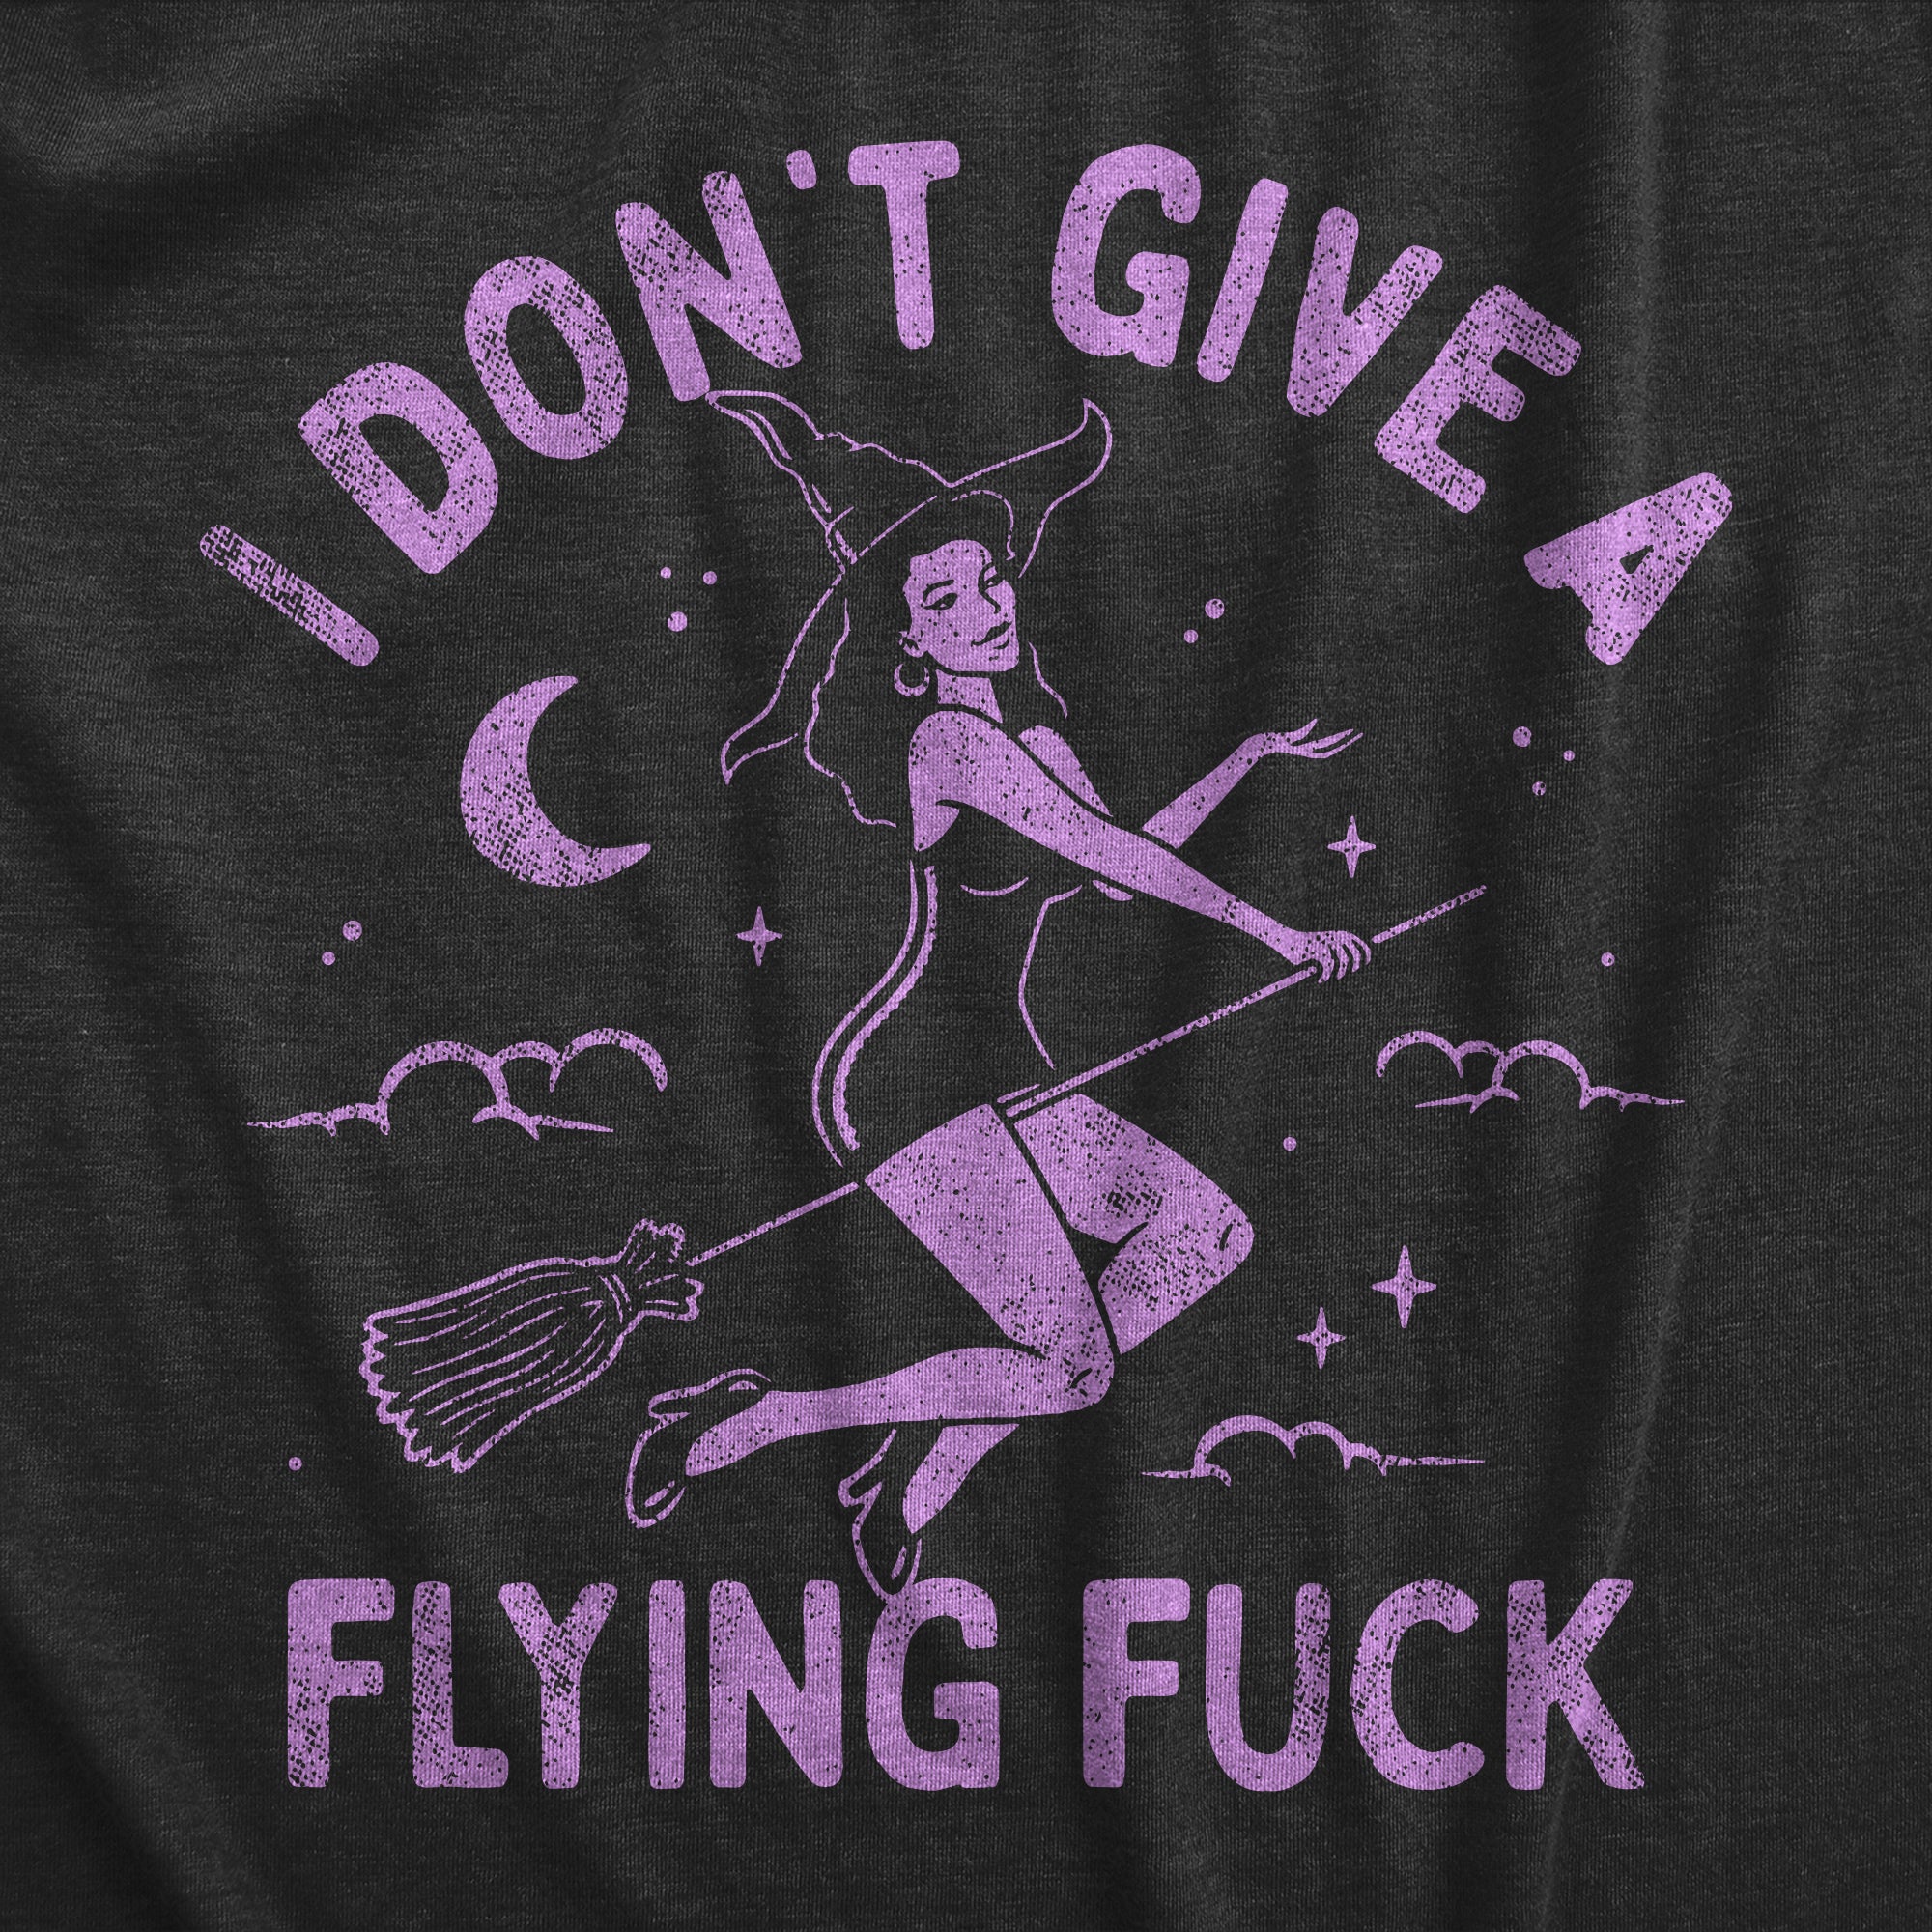 Funny Heather Black - FLYING I Dont Give A Flying Fuck Womens T Shirt Nerdy Halloween Sarcastic Tee